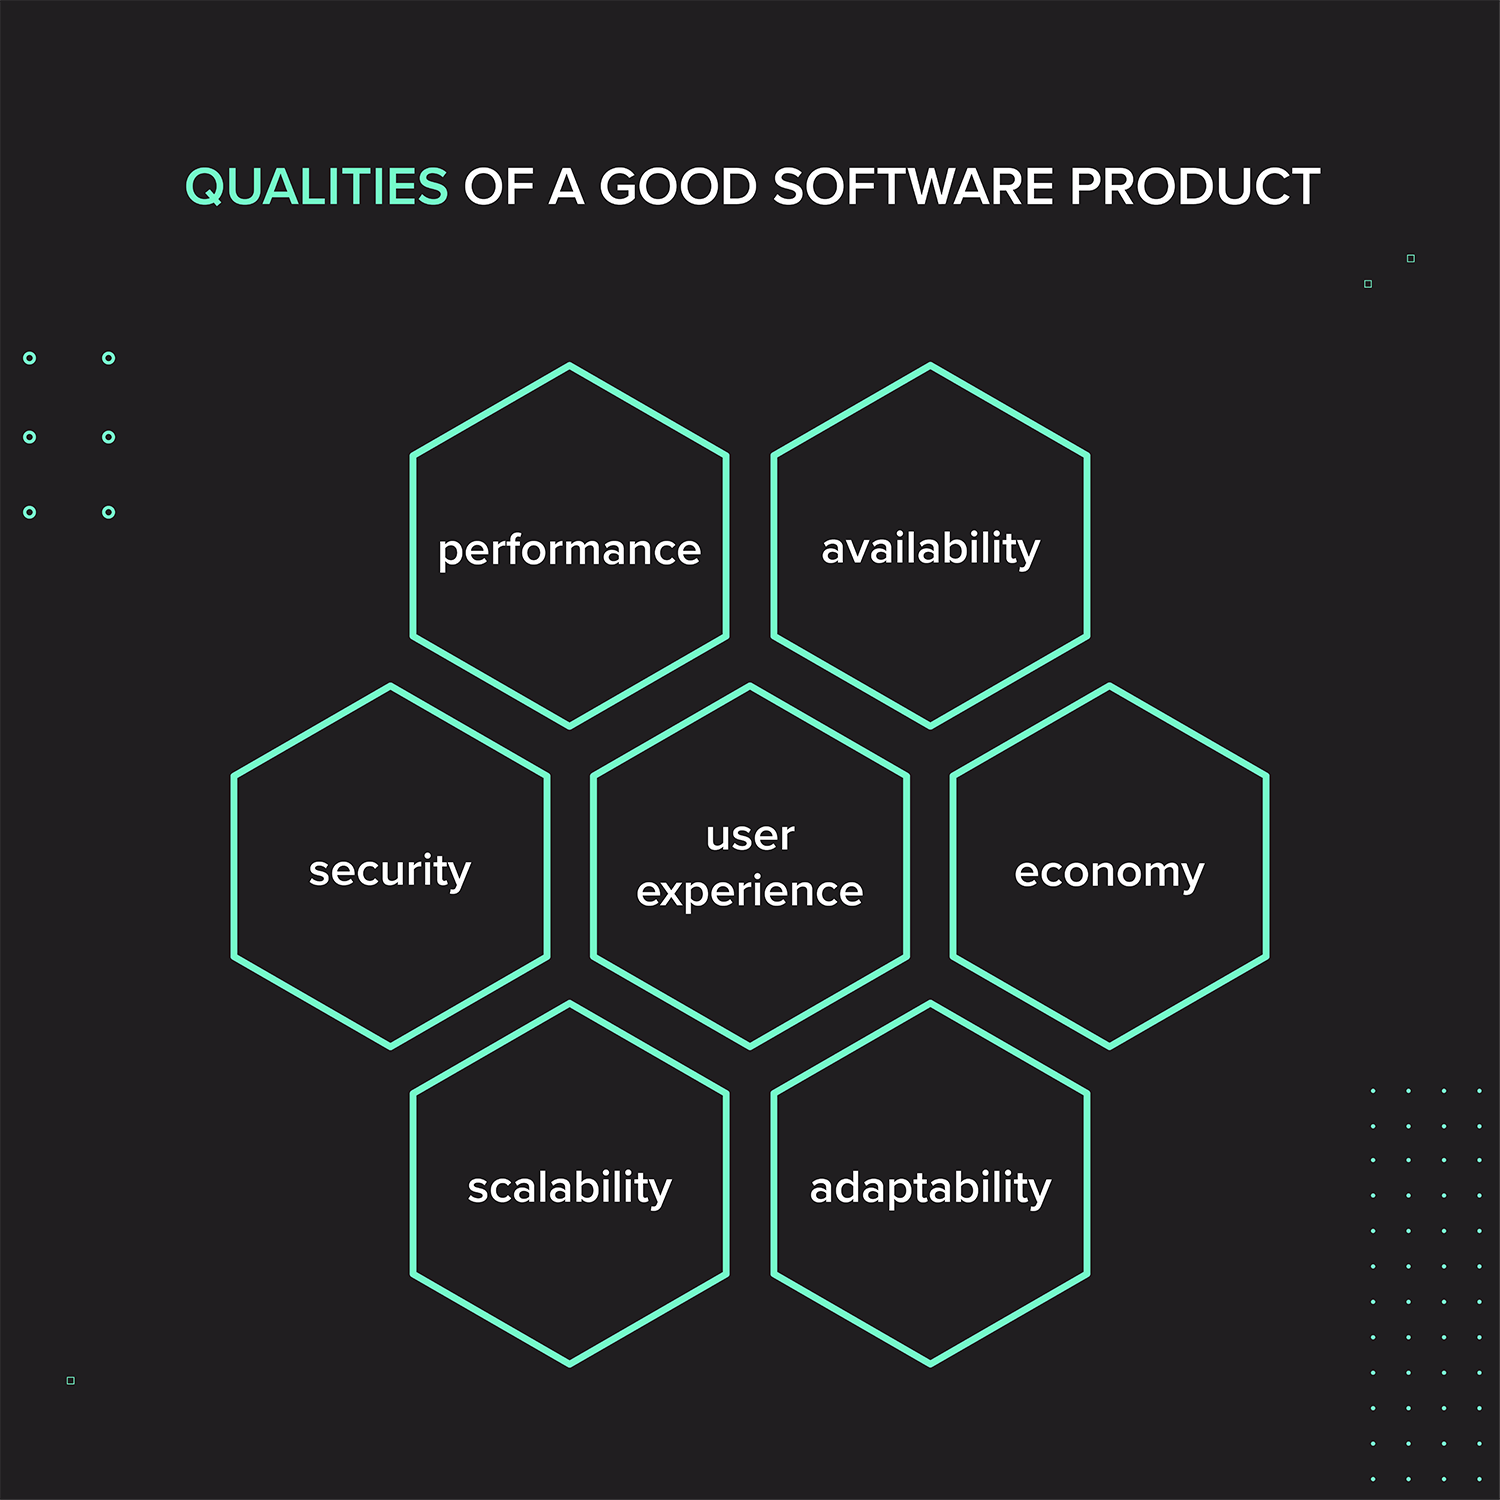 Qualities of a good software product